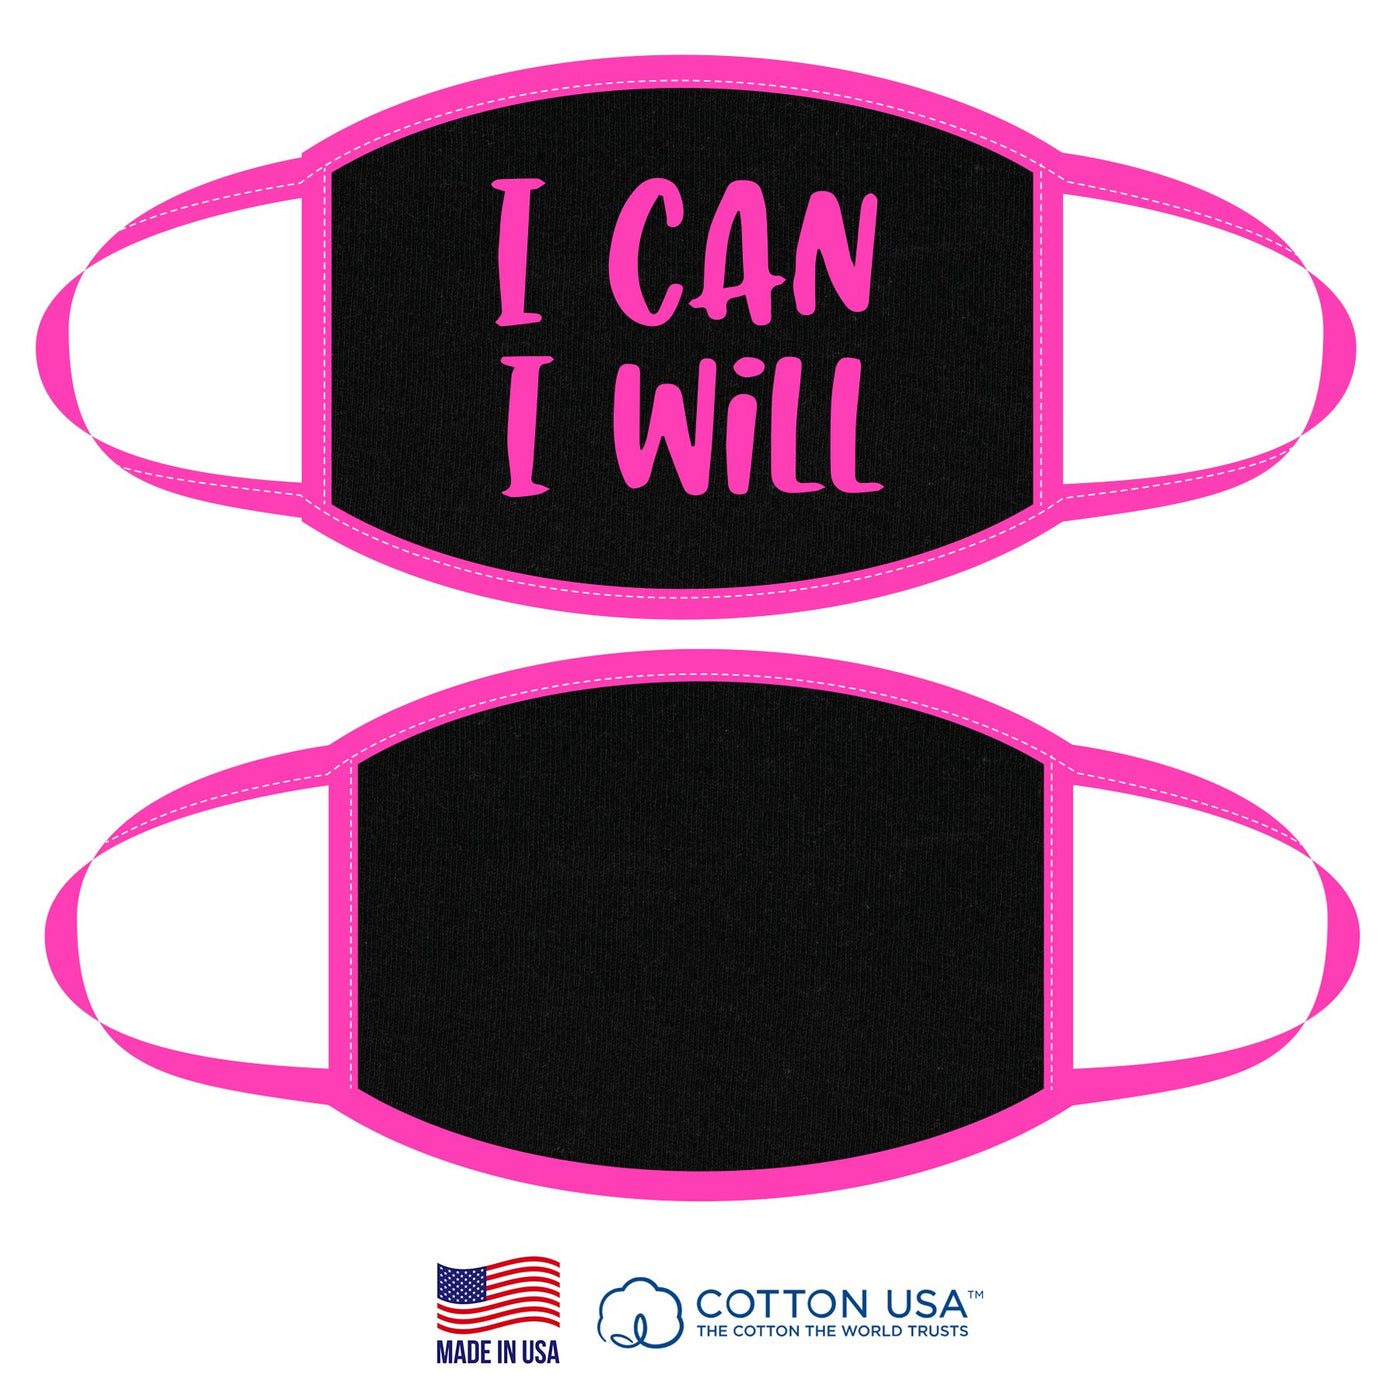 100% COTTON MADE IN THE USA I CAN I WILL NEON PINK FABRIC FACE MASK